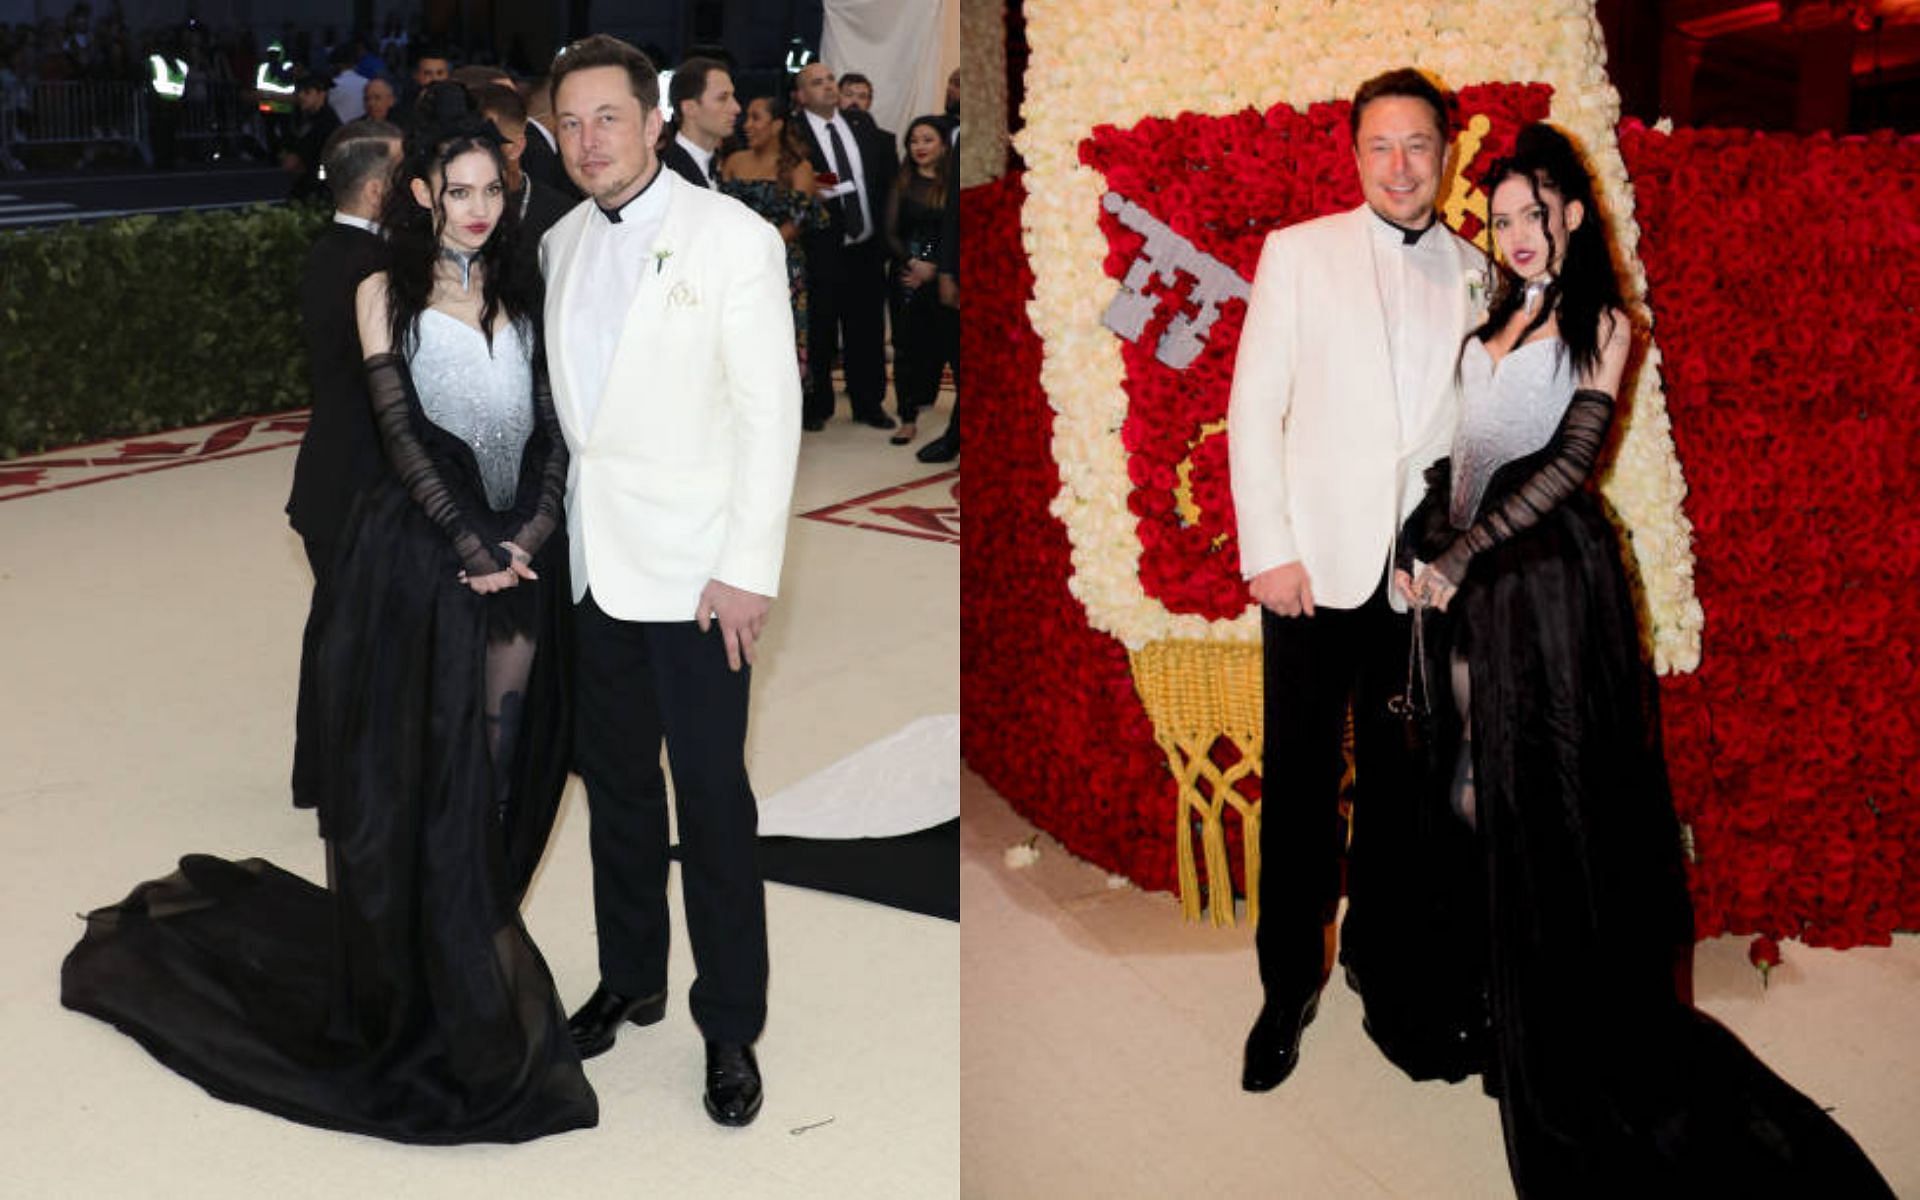 Elon Musk and Grimmes at the MET Gala 2018 (Image via Getty Images)